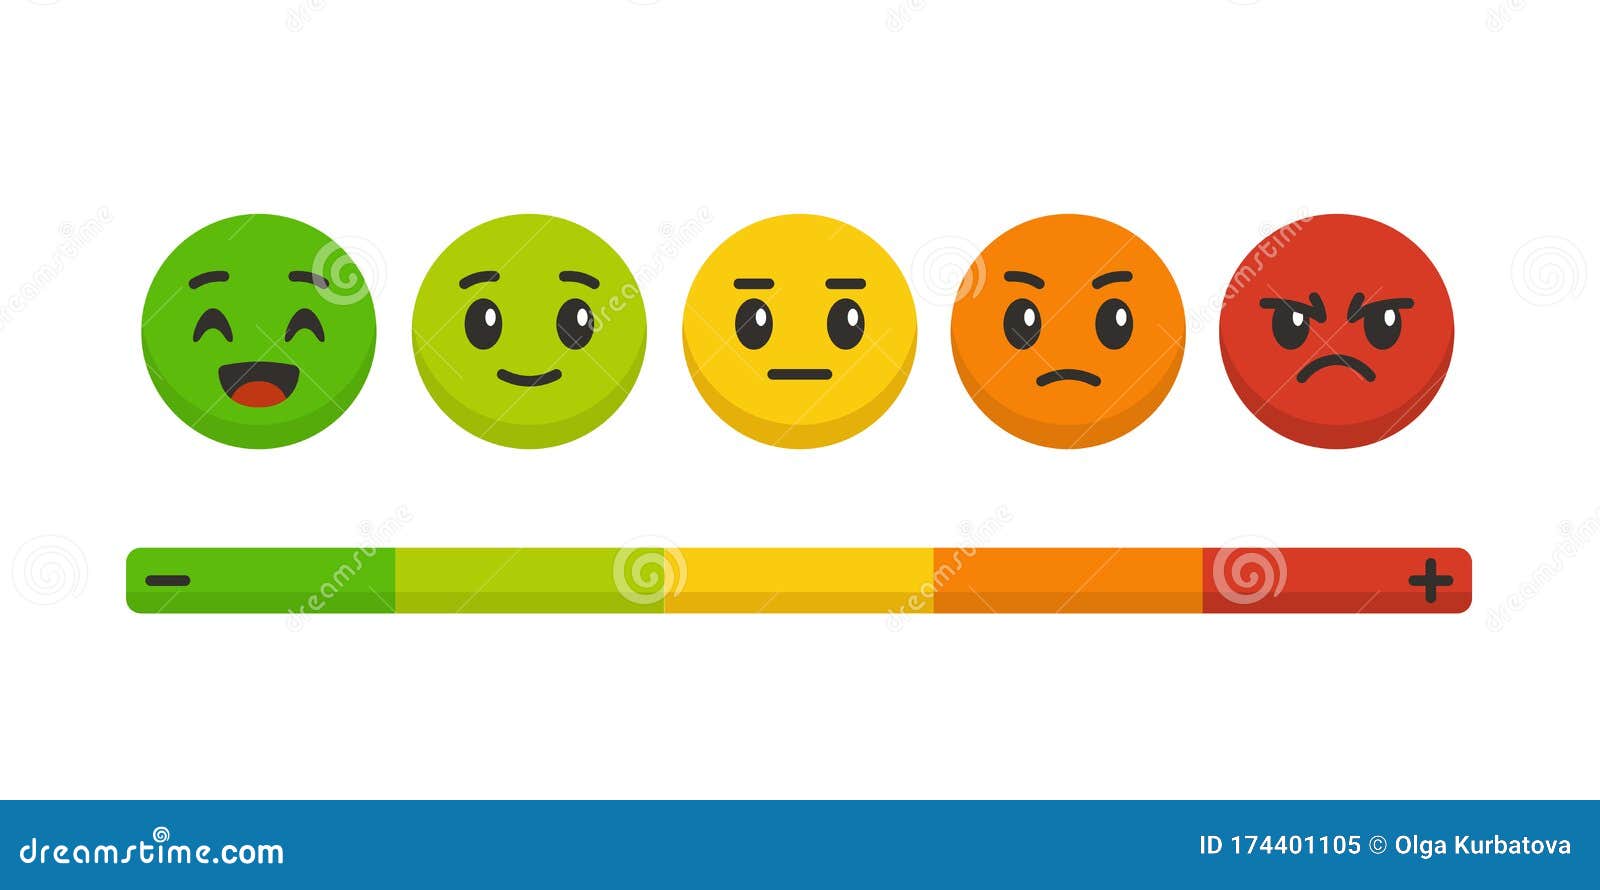 https://thumbs.dreamstime.com/z/feedback-scale-rating-satisfaction-colored-emotional-balls-set-excellent-good-normal-bad-awful-customers-survey-feedback-174401105.jpg